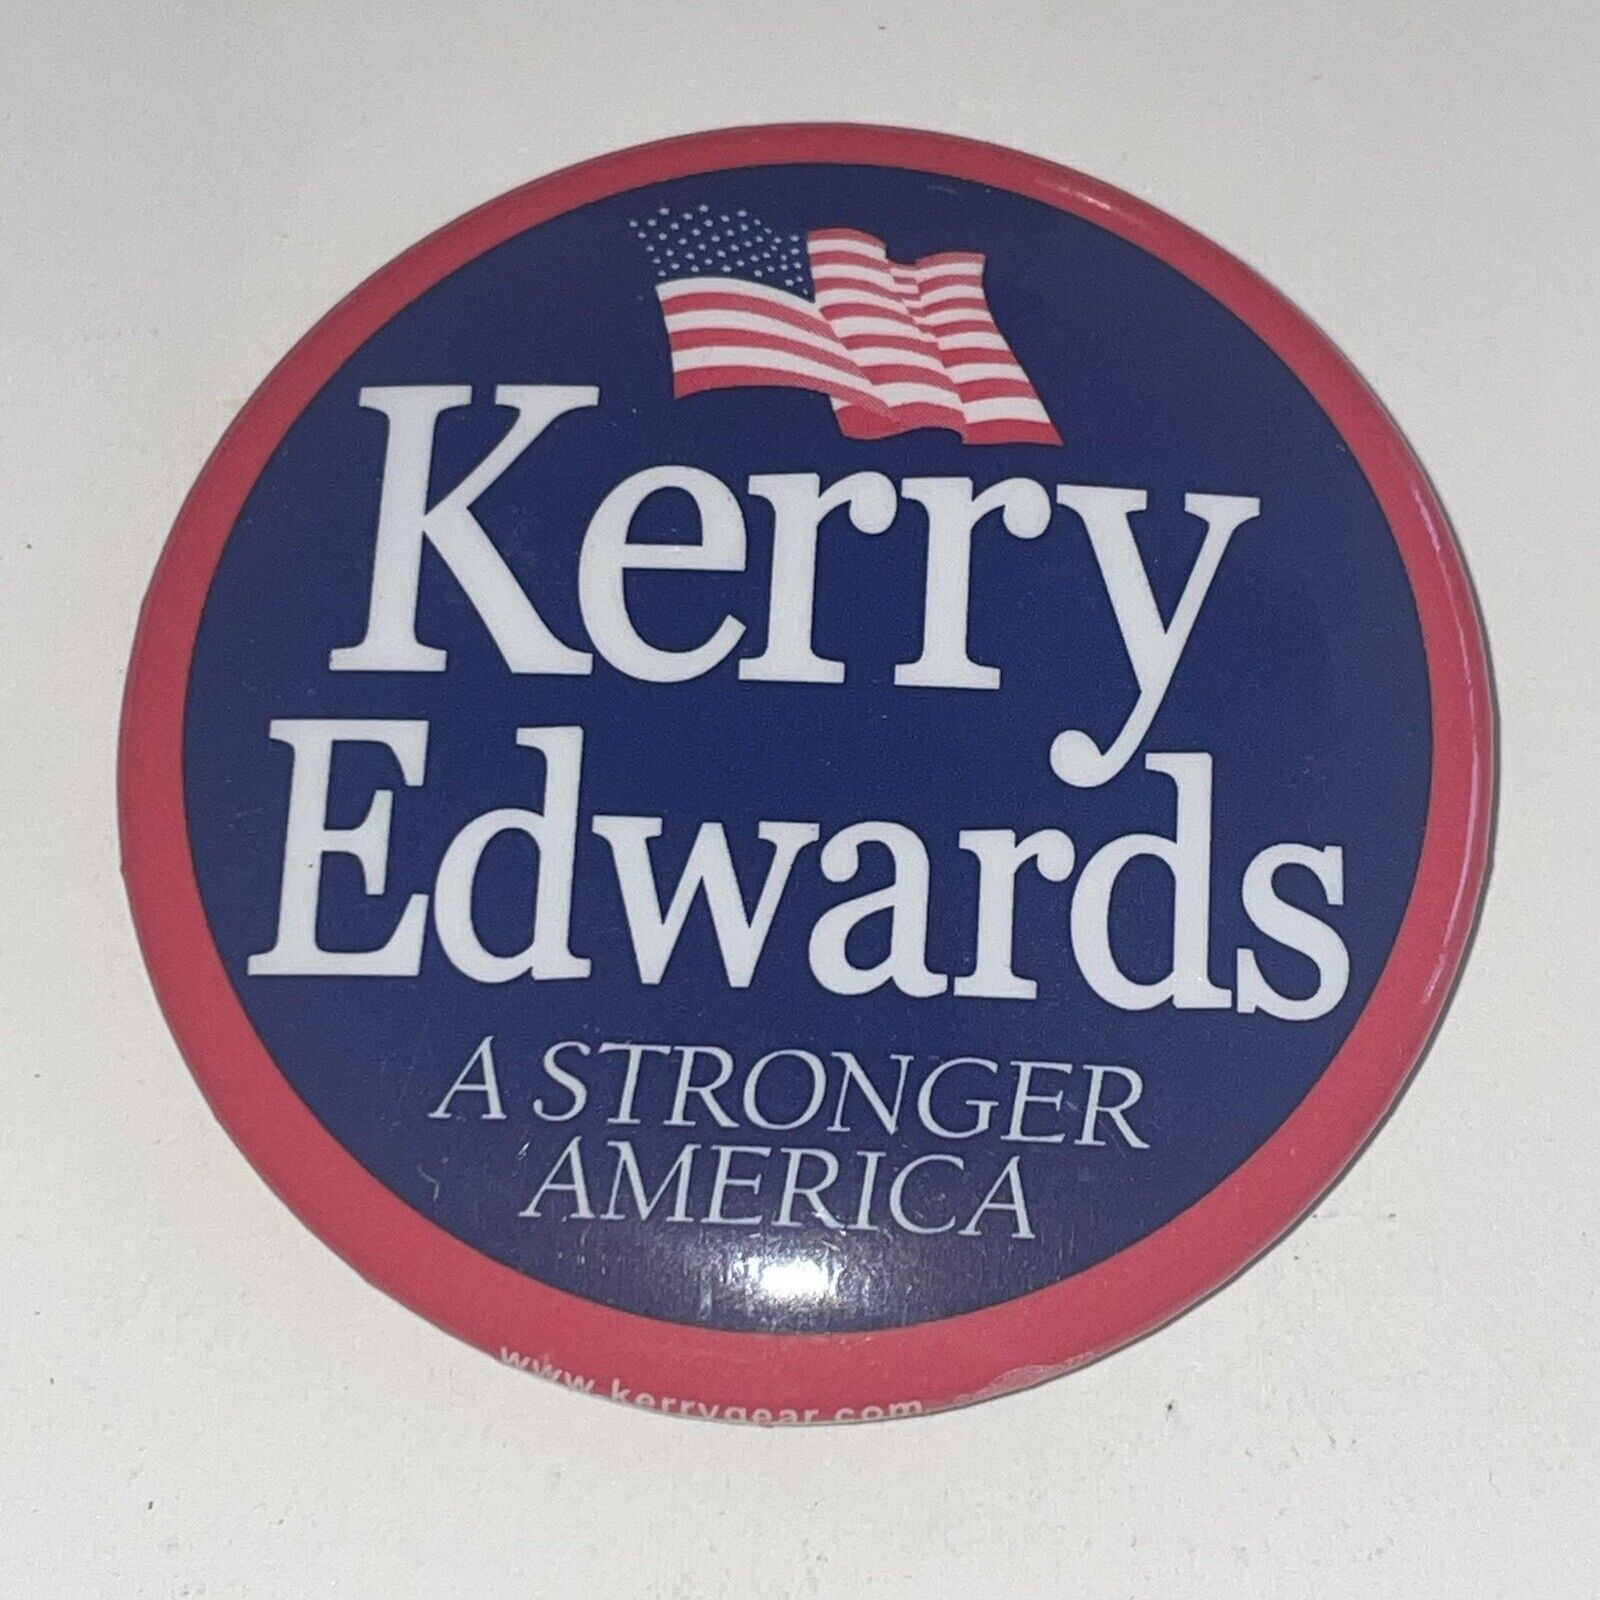 Kerry Edwards A Stronger America 2004 Presidential Campaign Button Pin Pinback